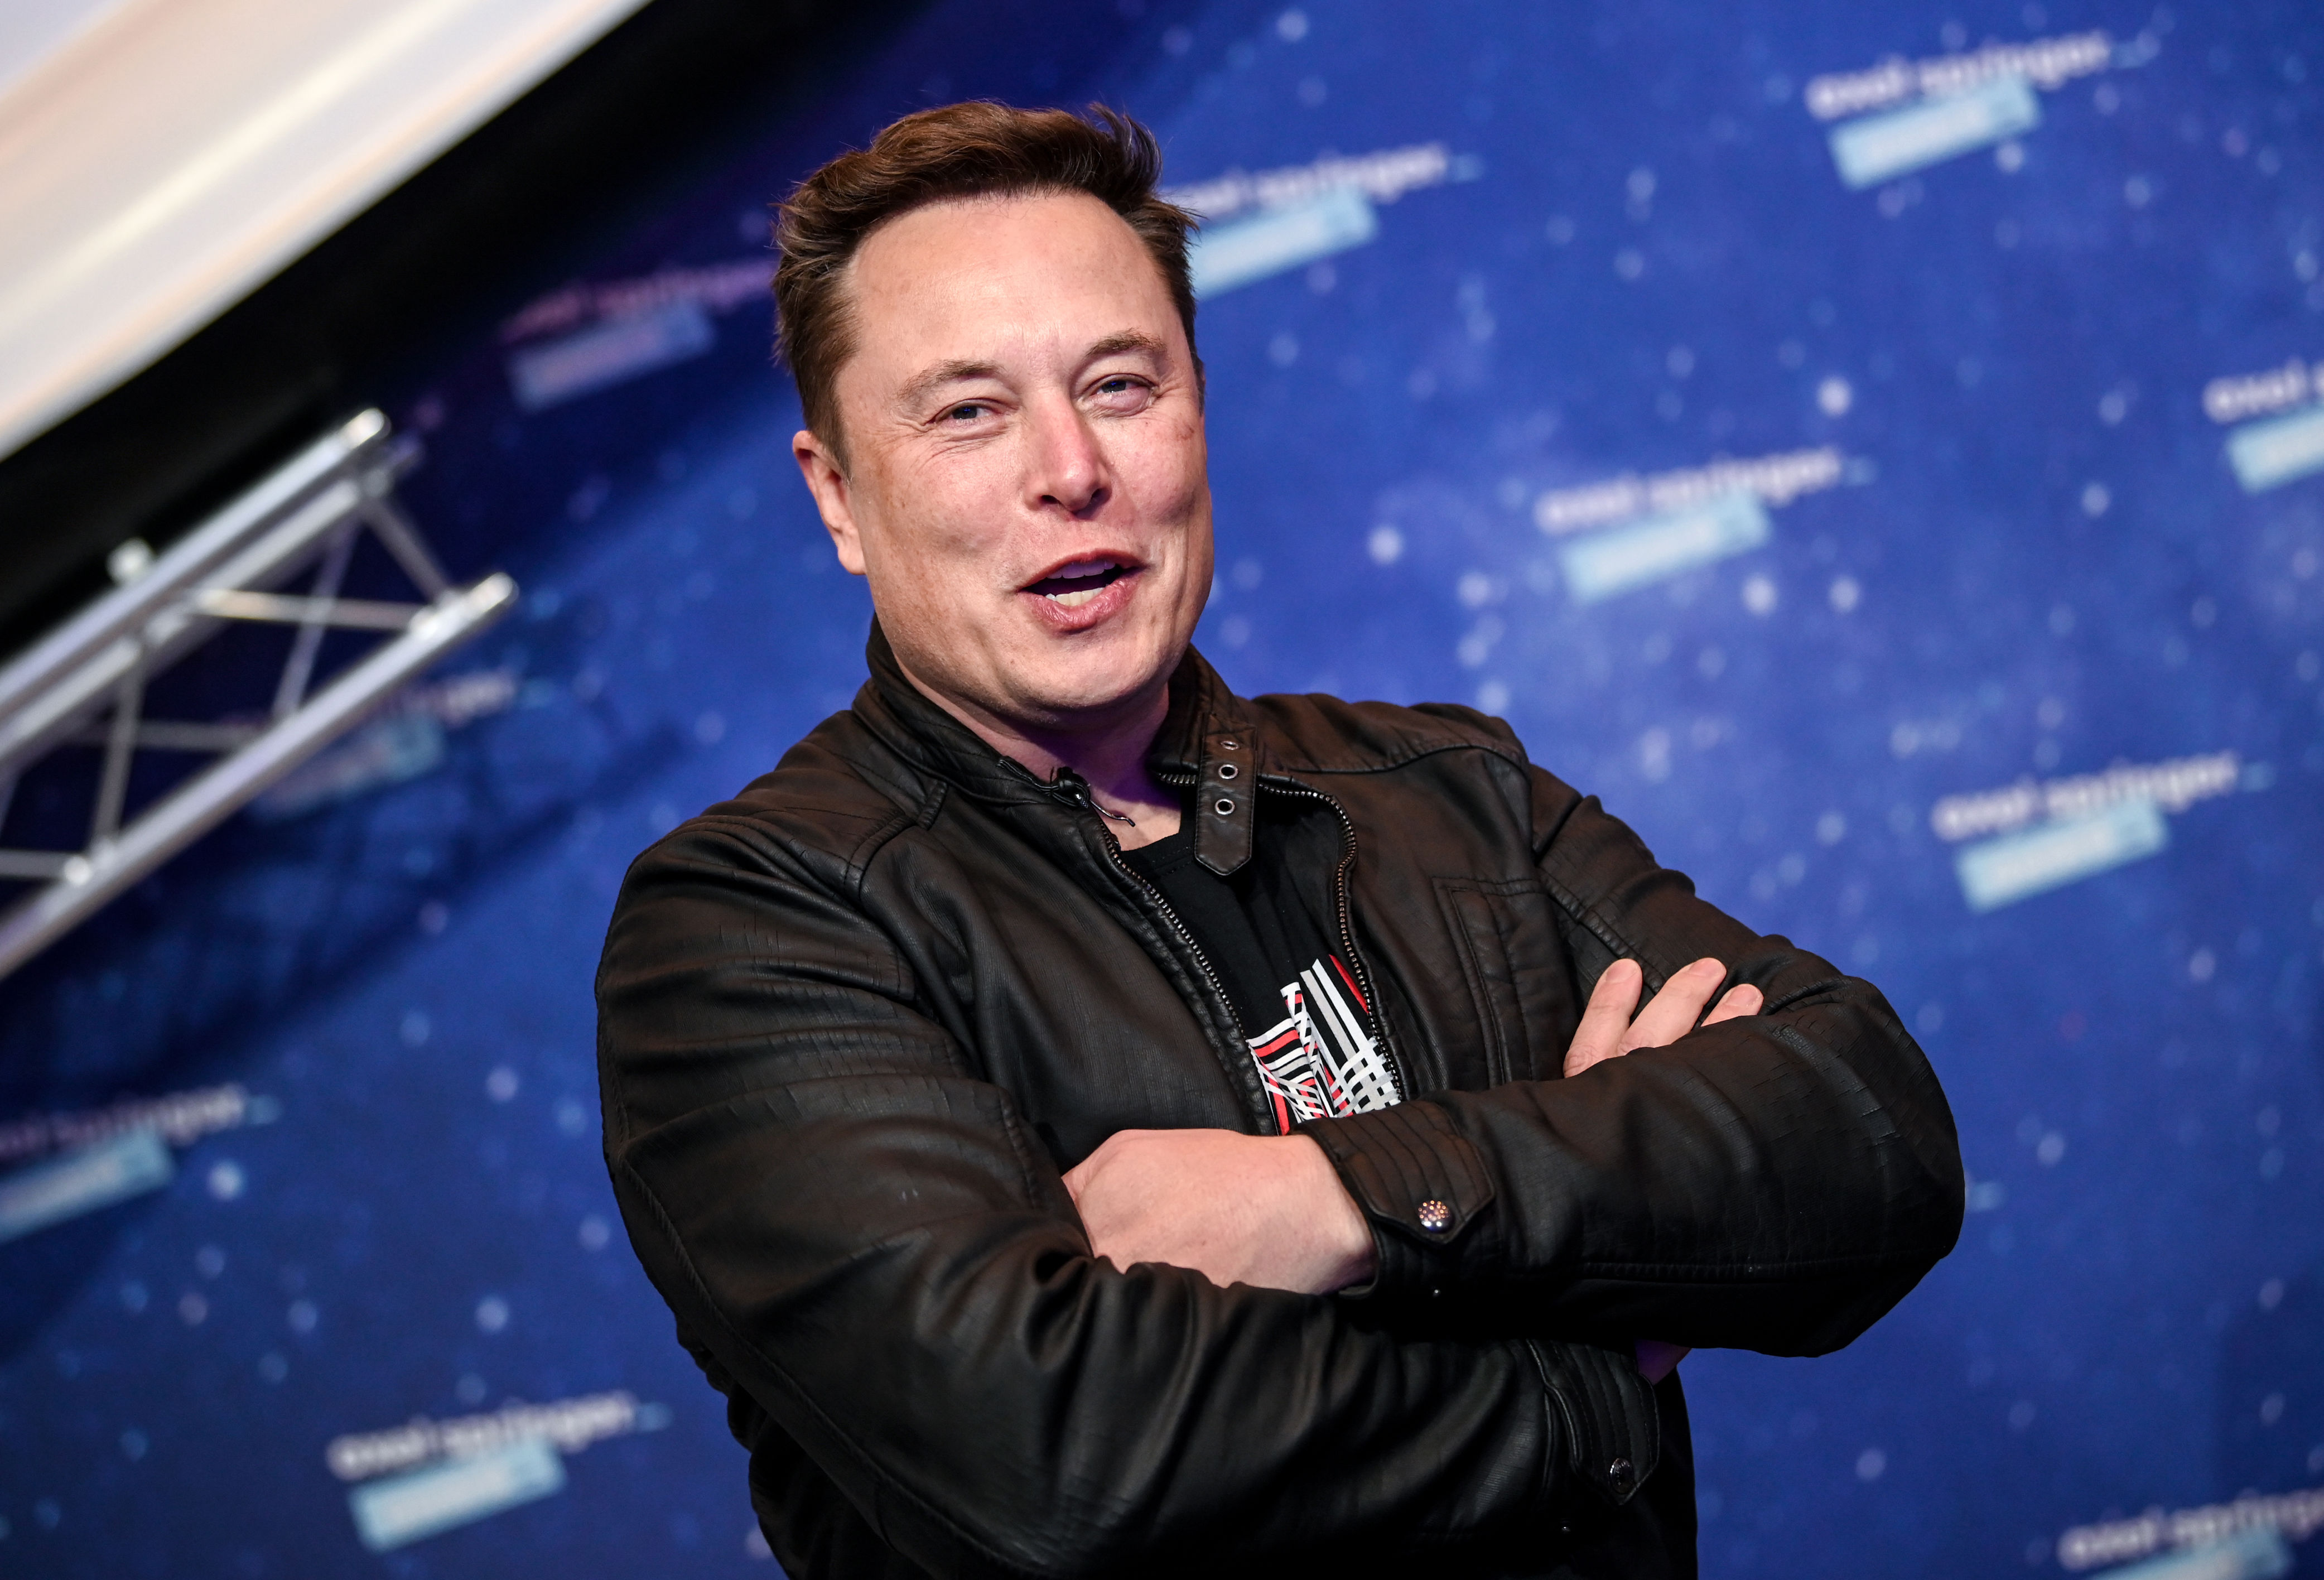 <p>According to reports -- including a 2018 story from <a href="https://pagesix.com/2018/07/25/its-highly-likely-elon-musk-spent-over-20k-on-hair-transplant-surgery-doctor-says/">Page Six</a> -- it's highly probably that Elon Musk <span>has had hair transplant surgery.</span> In this picture from 2020, Elon -- one of the richest men in the world -- has a noticeably fuller head of hair than what he sported earlier in his illustrious career.</p>